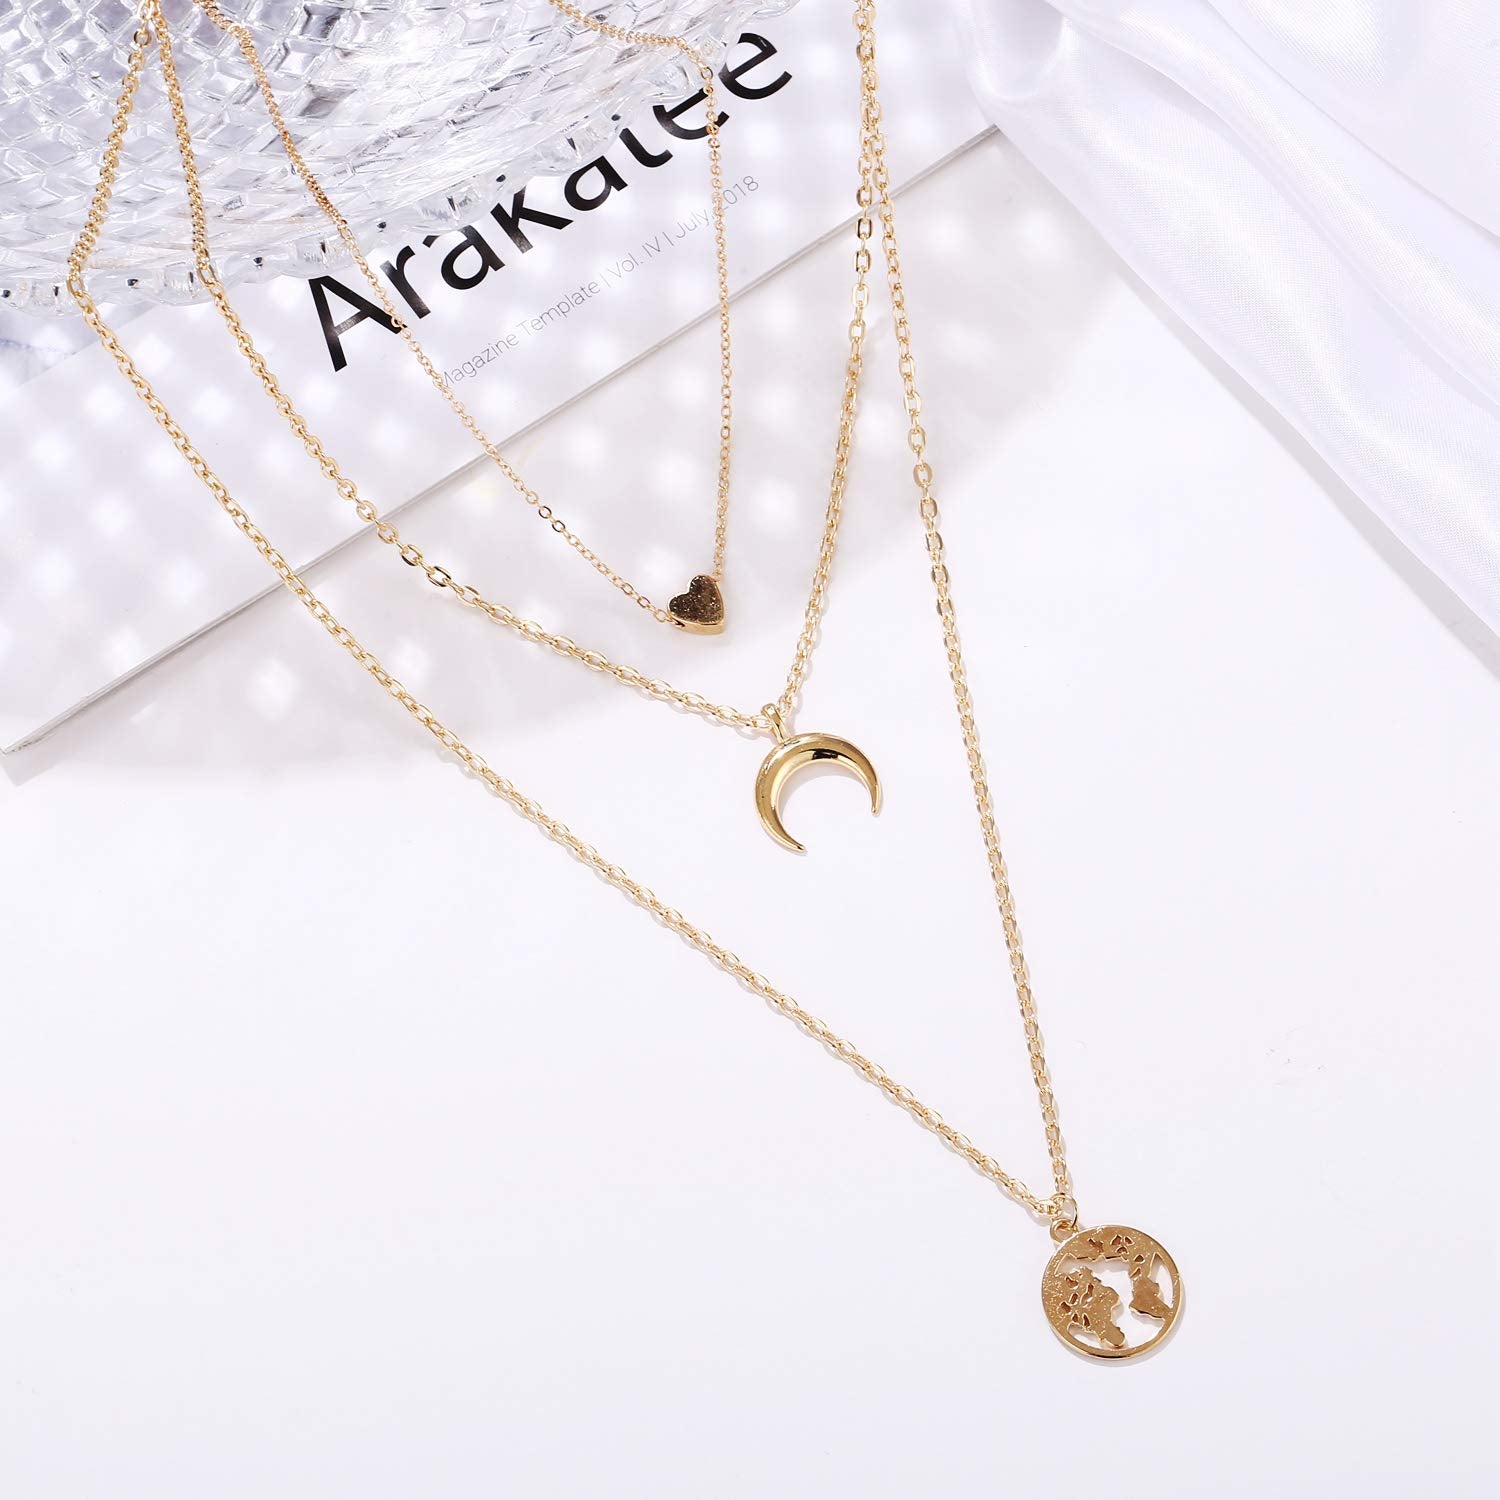 Arzonai Fashion Latest Multilayer Western Neckpiece Neck Chain Necklace for Women and Girls, Golden